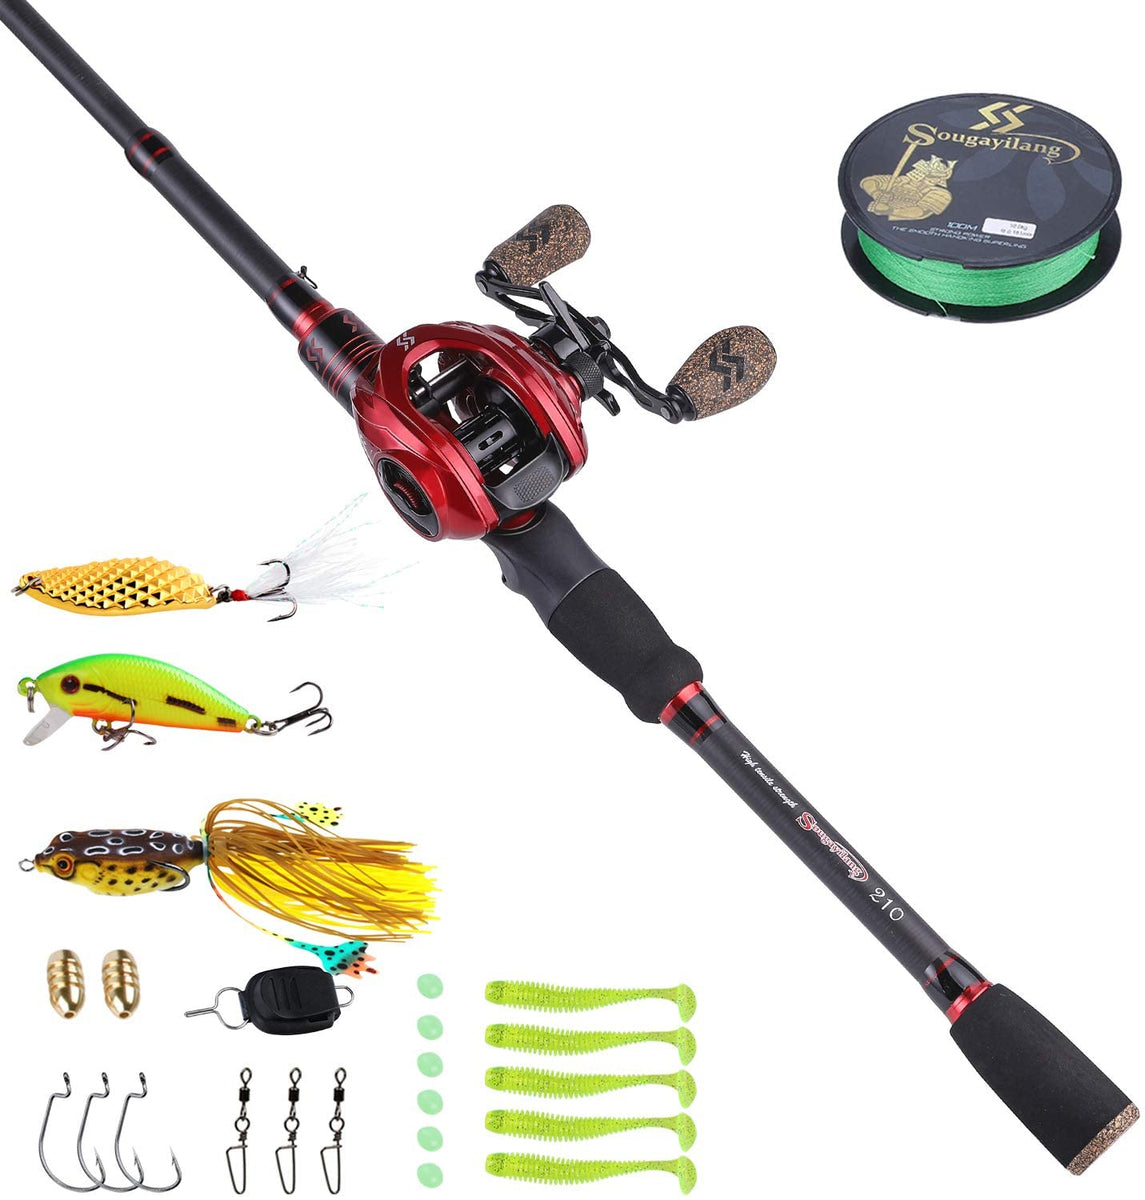 Sougayilang Spinning Fishing Combos, 4 Sections Carbon Fiber Durable Rod  With Cork Handle, 12+1BB Spinning Reel For Bass Trout Salmon, Fishing  Accesso